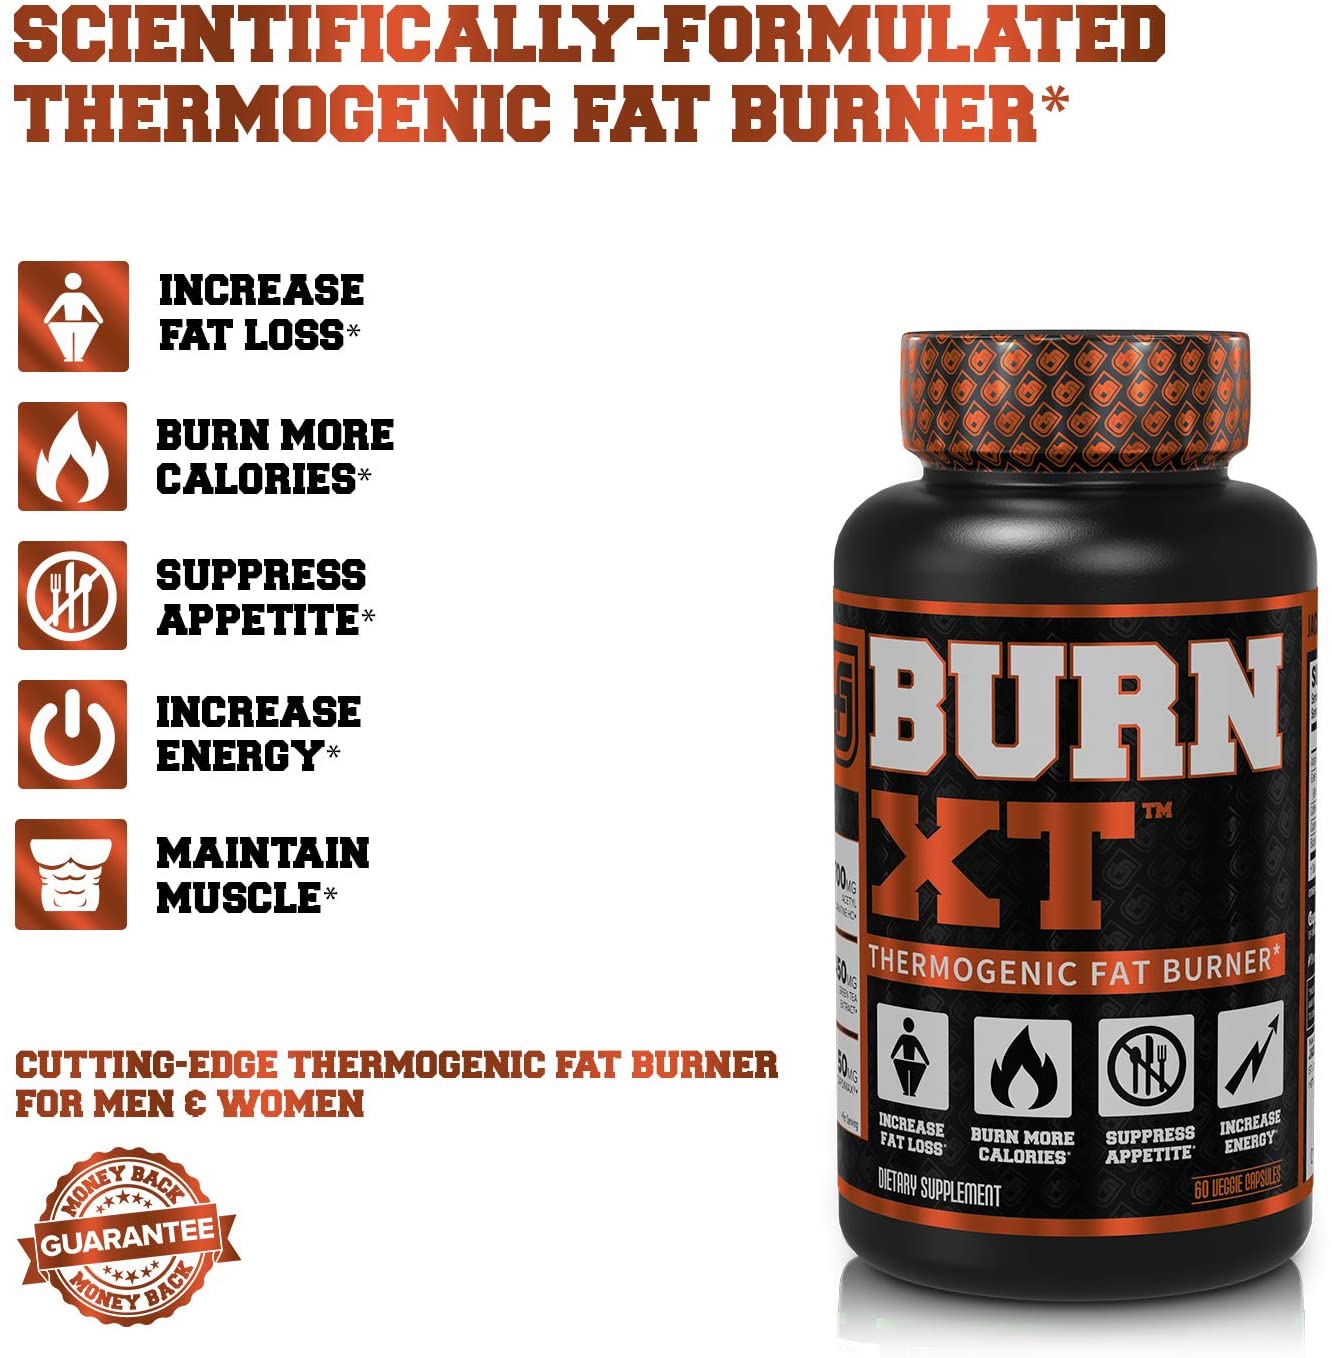 Burn-XT Thermogenic Fat Burner - Weight Loss Supplement, Appetite Suppressant, Energy Booster - Premium Fat Burning Acetyl L-Car-2